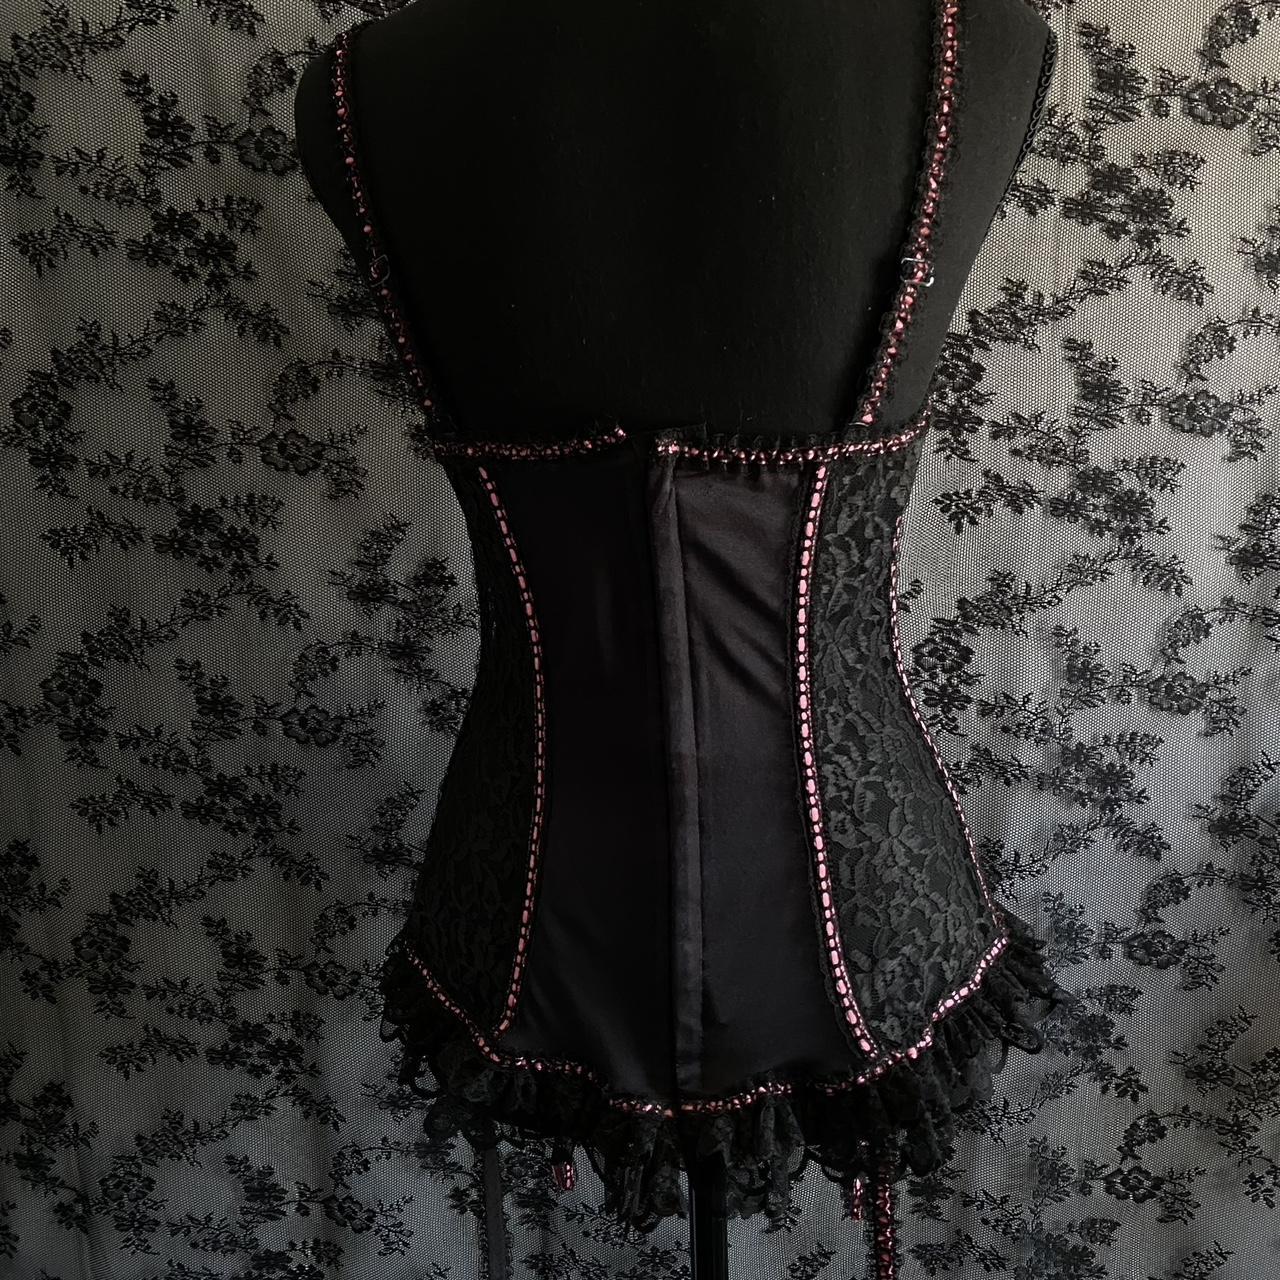 American Vintage Women's Black and Pink Corset (6)